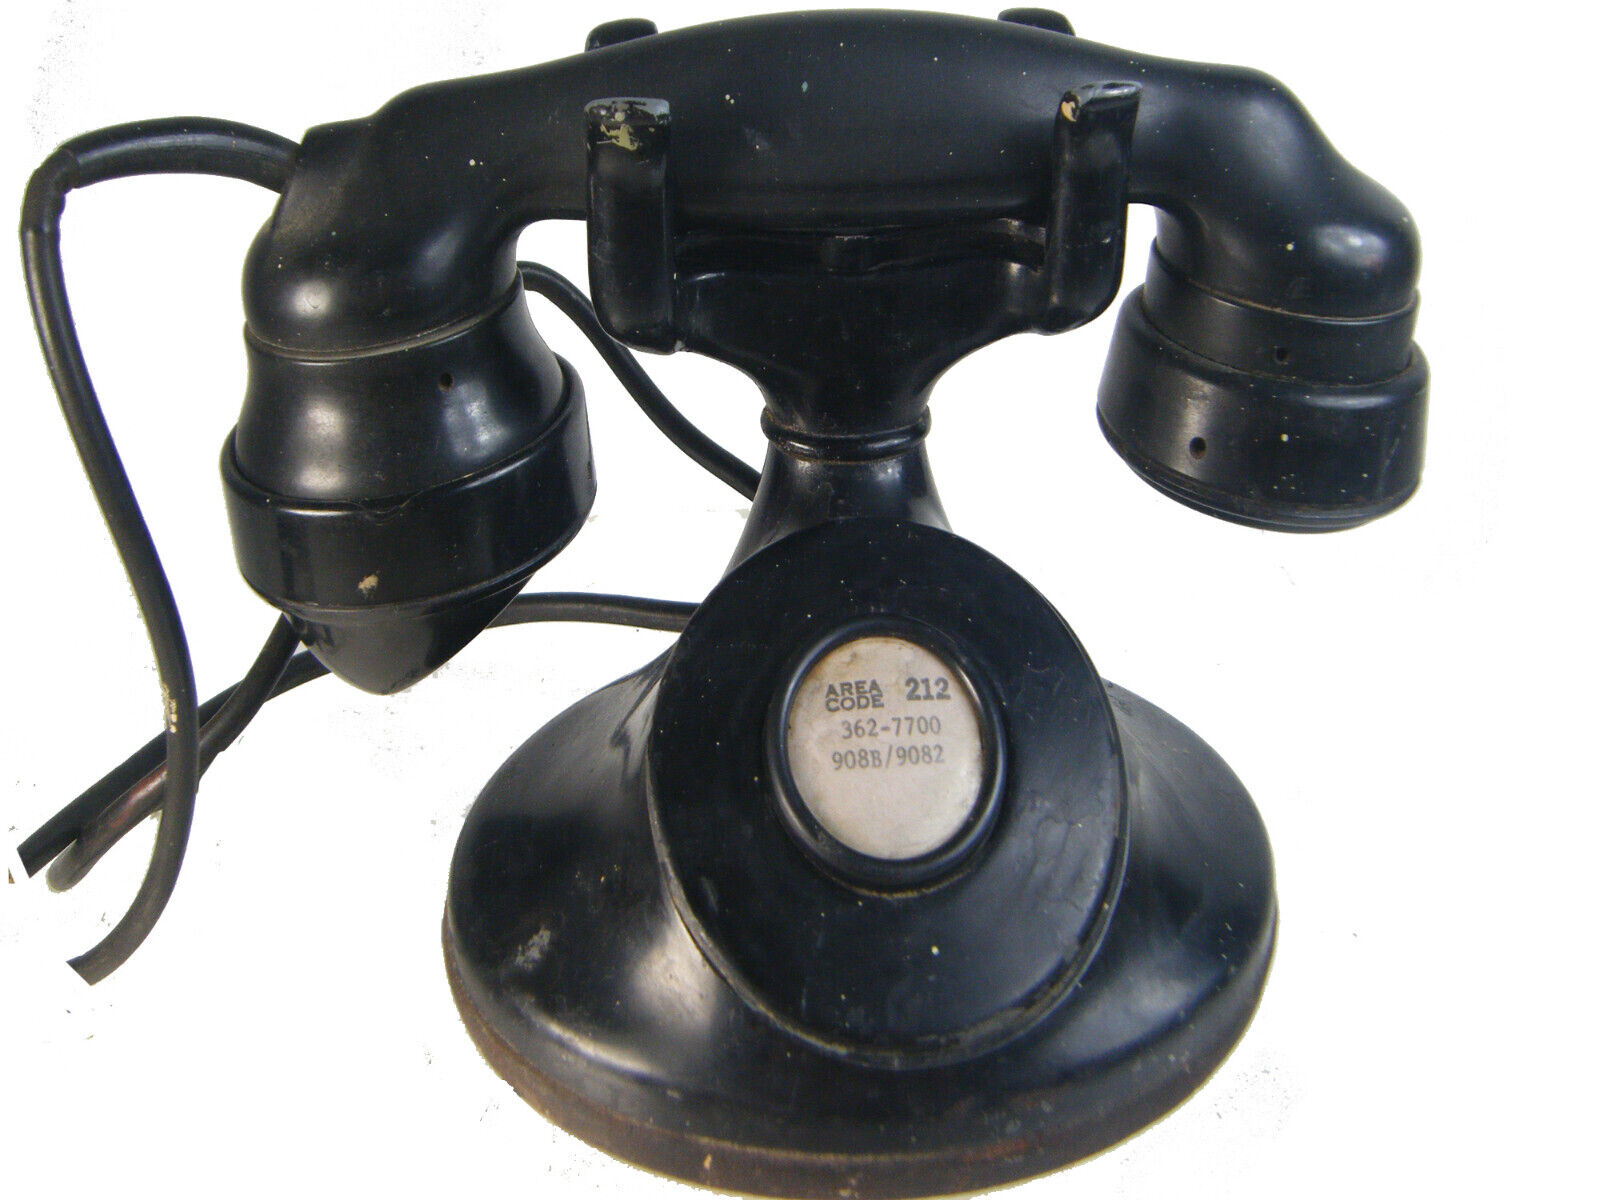 Western Electric- 202 / 3rd Cradle Telephone - Oval Base